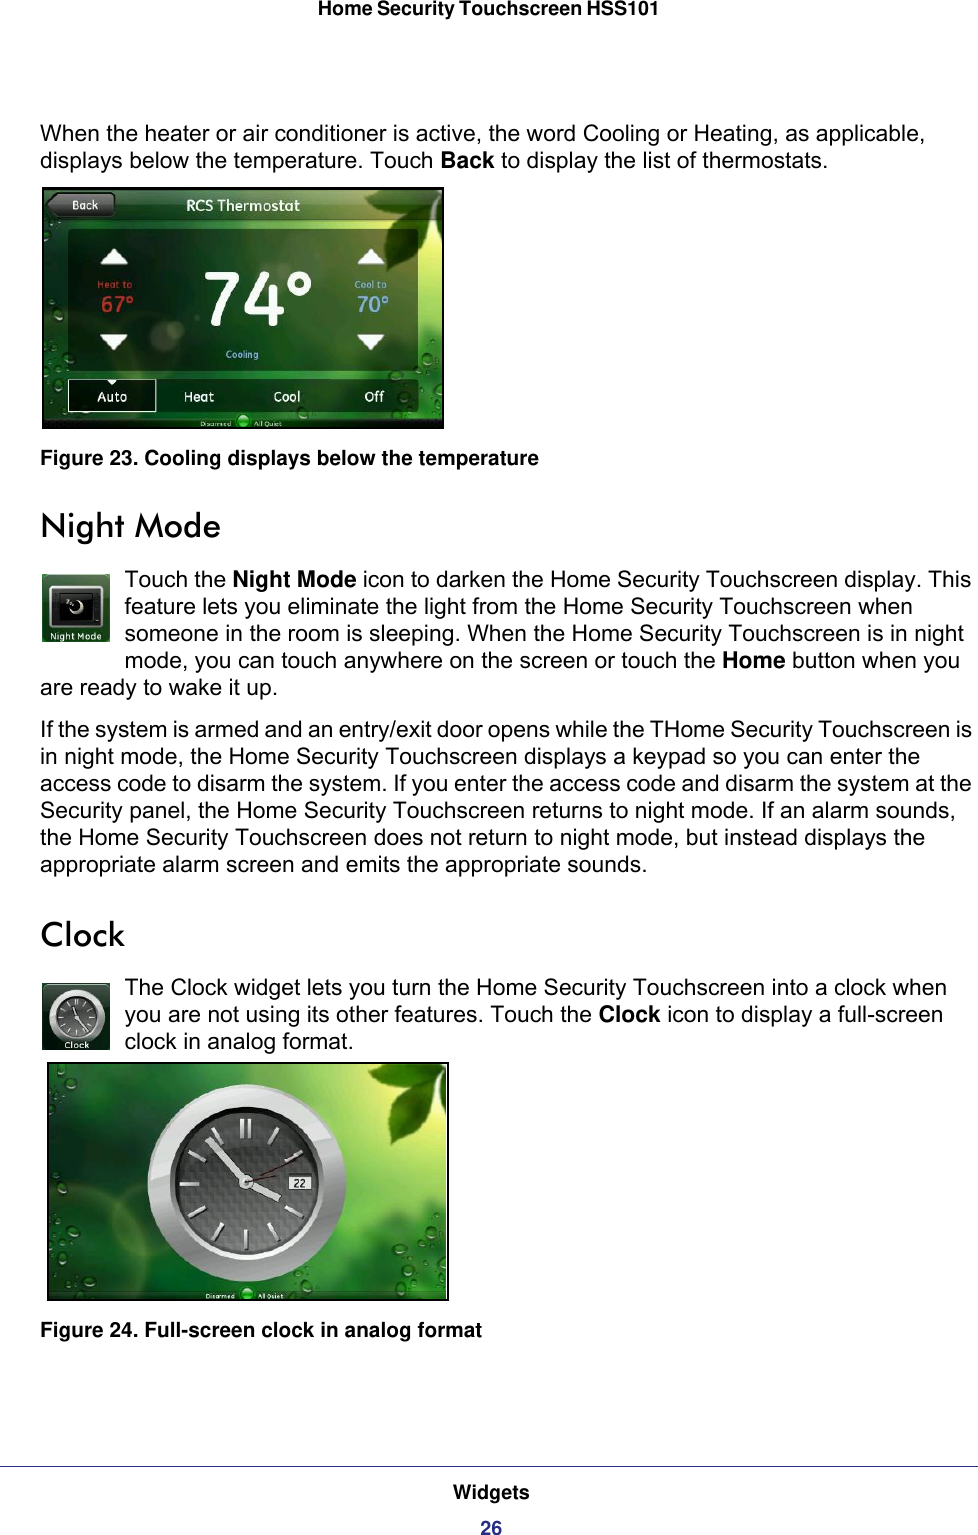 Widgets26Home Security Touchscreen HSS101 When the heater or air conditioner is active, the word Cooling or Heating, as applicable, displays below the temperature. Touch Back to display the list of thermostats.Figure 23. Cooling displays below the temperatureNight ModeTouch the Night Mode icon to darken the Home Security Touchscreen display. This feature lets you eliminate the light from the Home Security Touchscreen when someone in the room is sleeping. When the Home Security Touchscreen is in night mode, you can touch anywhere on the screen or touch the Home button when you are ready to wake it up.If the system is armed and an entry/exit door opens while the THome Security Touchscreen is in night mode, the Home Security Touchscreen displays a keypad so you can enter the access code to disarm the system. If you enter the access code and disarm the system at the Security panel, the Home Security Touchscreen returns to night mode. If an alarm sounds, the Home Security Touchscreen does not return to night mode, but instead displays the appropriate alarm screen and emits the appropriate sounds.ClockThe Clock widget lets you turn the Home Security Touchscreen into a clock when you are not using its other features. Touch the Clock icon to display a full-screen clock in analog format.Figure 24. Full-screen clock in analog format